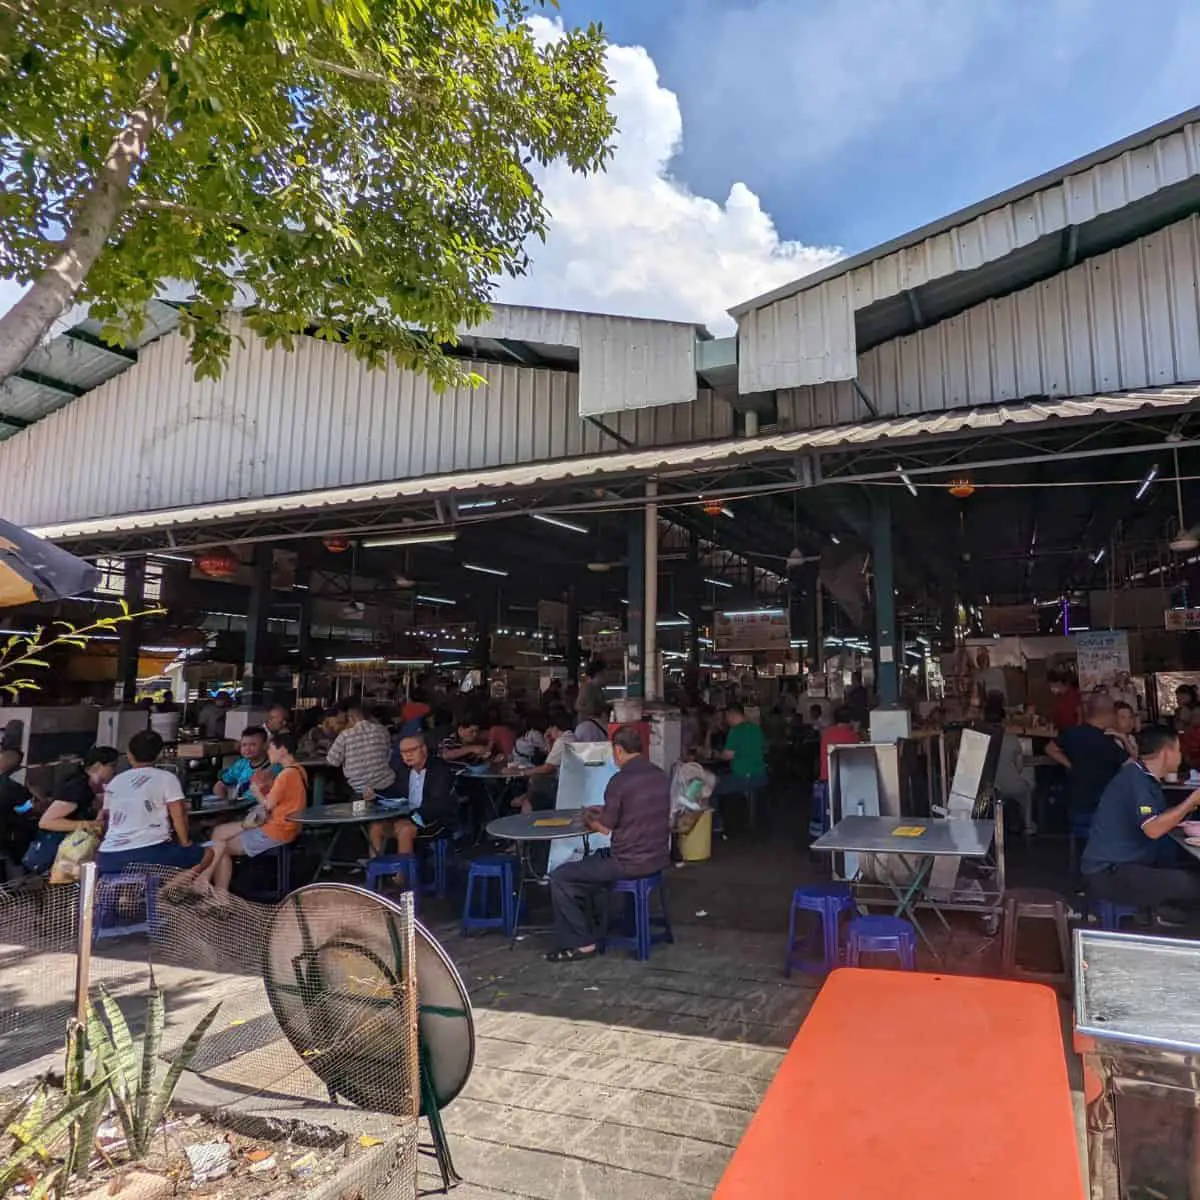 Lebuh Cecil market packed with crowds of people